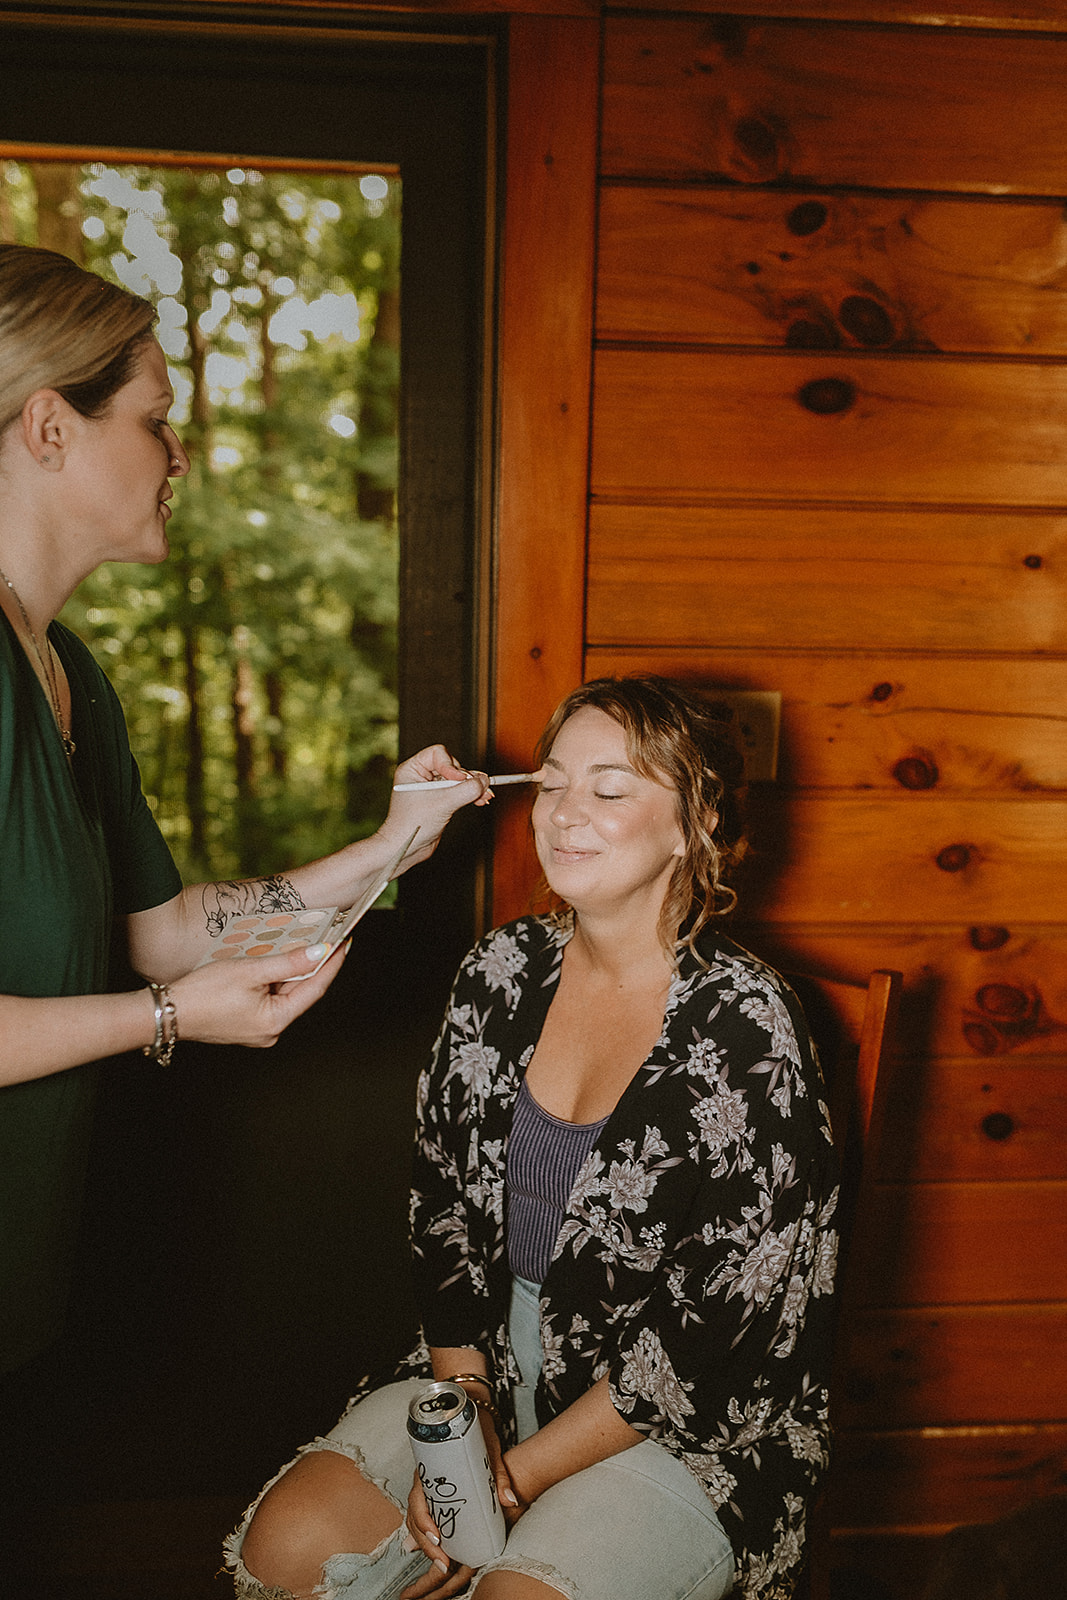 Bohemian outdoor wedding by Alabama wedding photographer The Millers Photo Co.